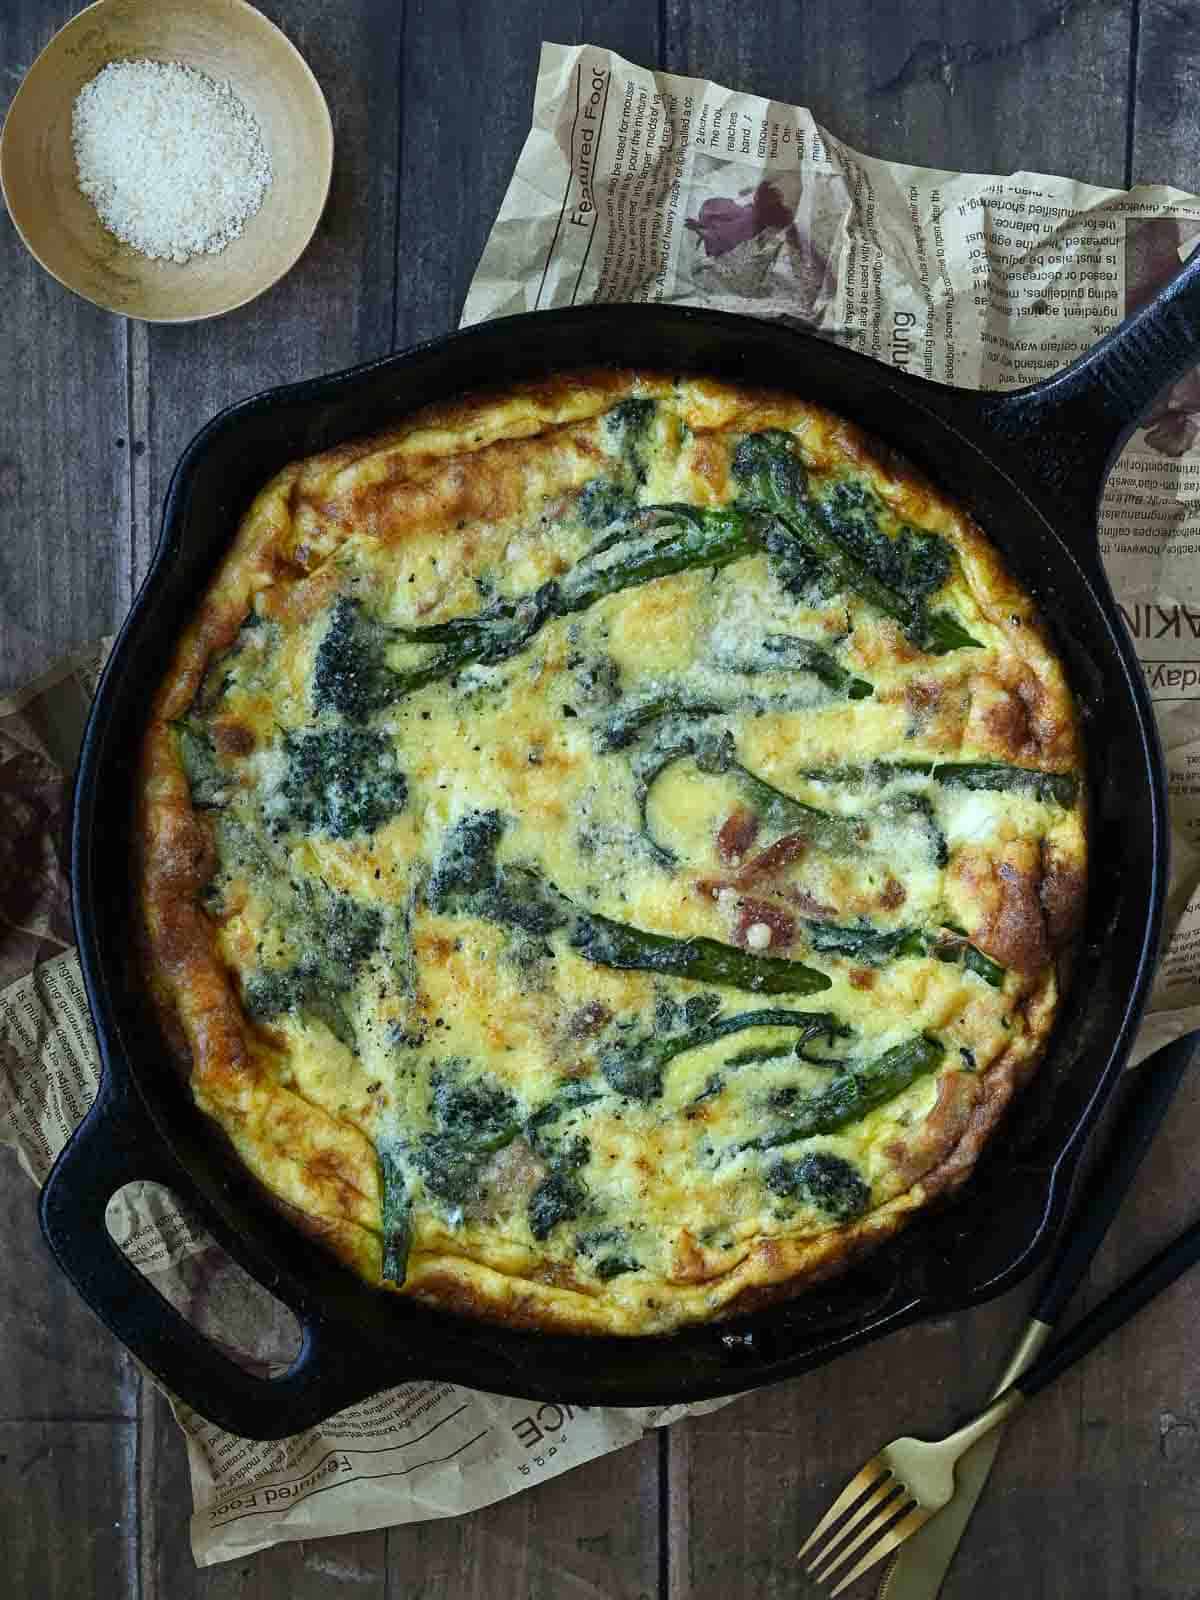 Overhead view of broccolini frittata in a black skillet on a wooden surface.